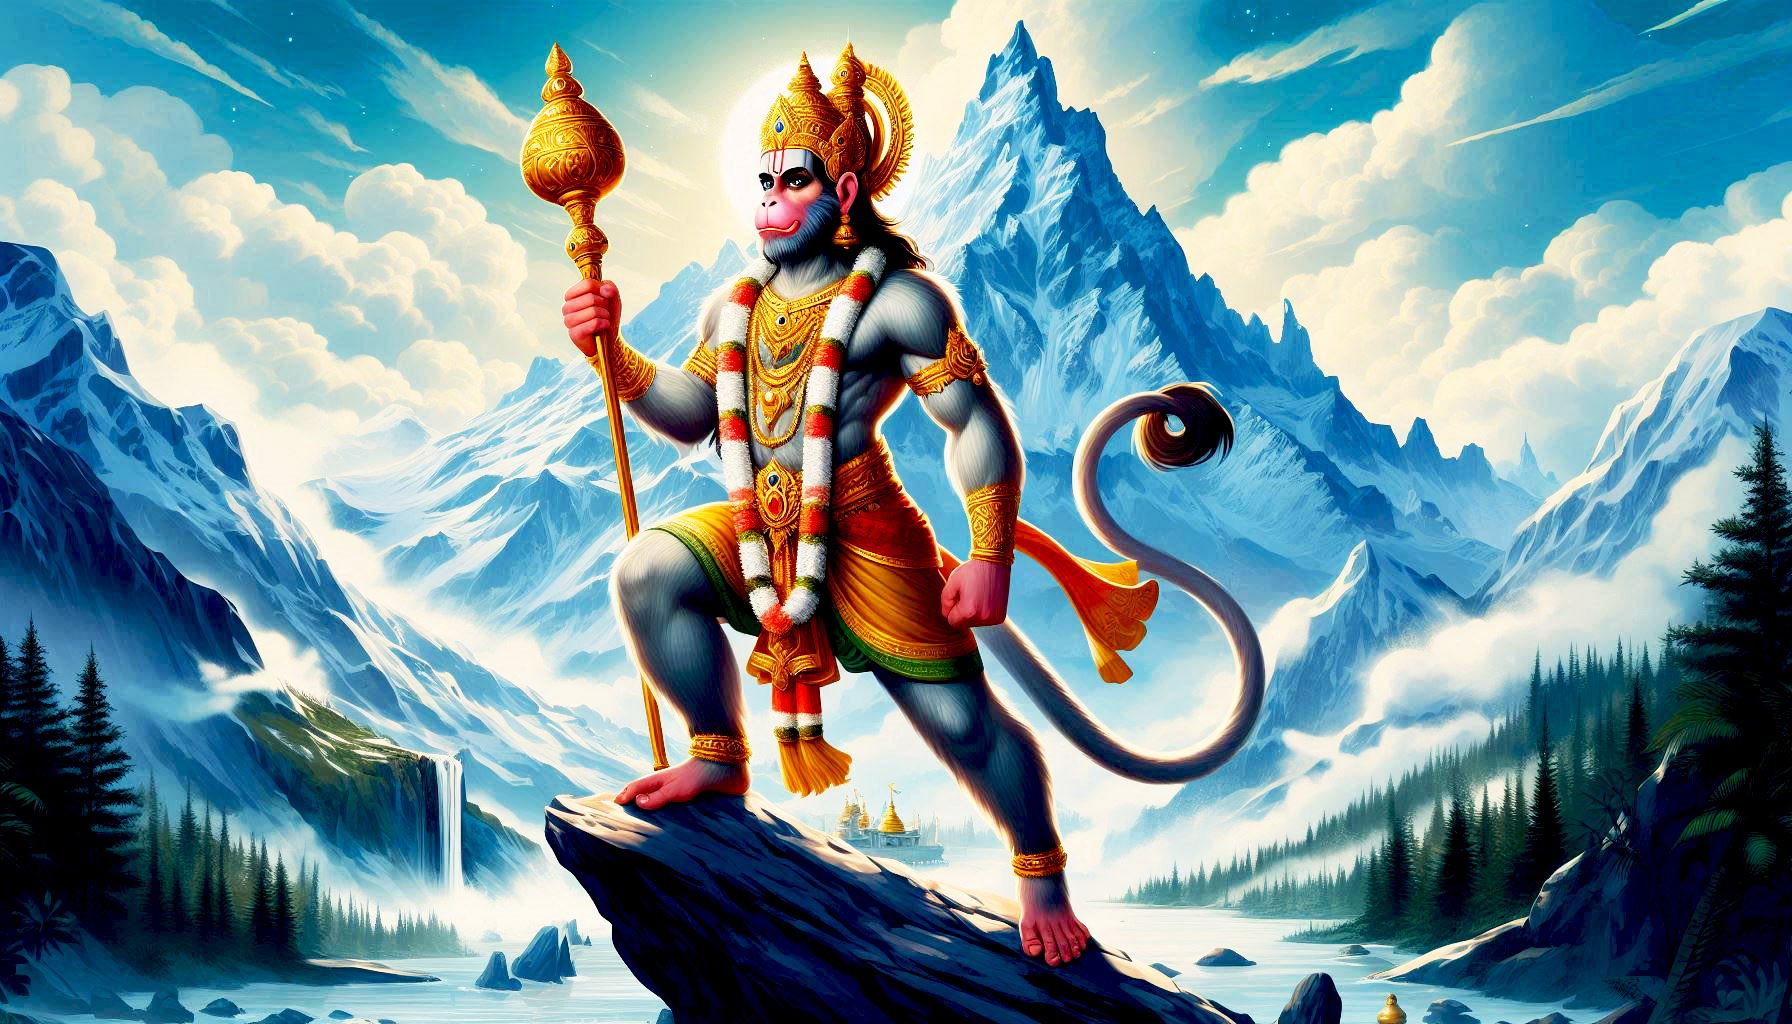 majestic jay hanuman amidst snowy mountains and cloud